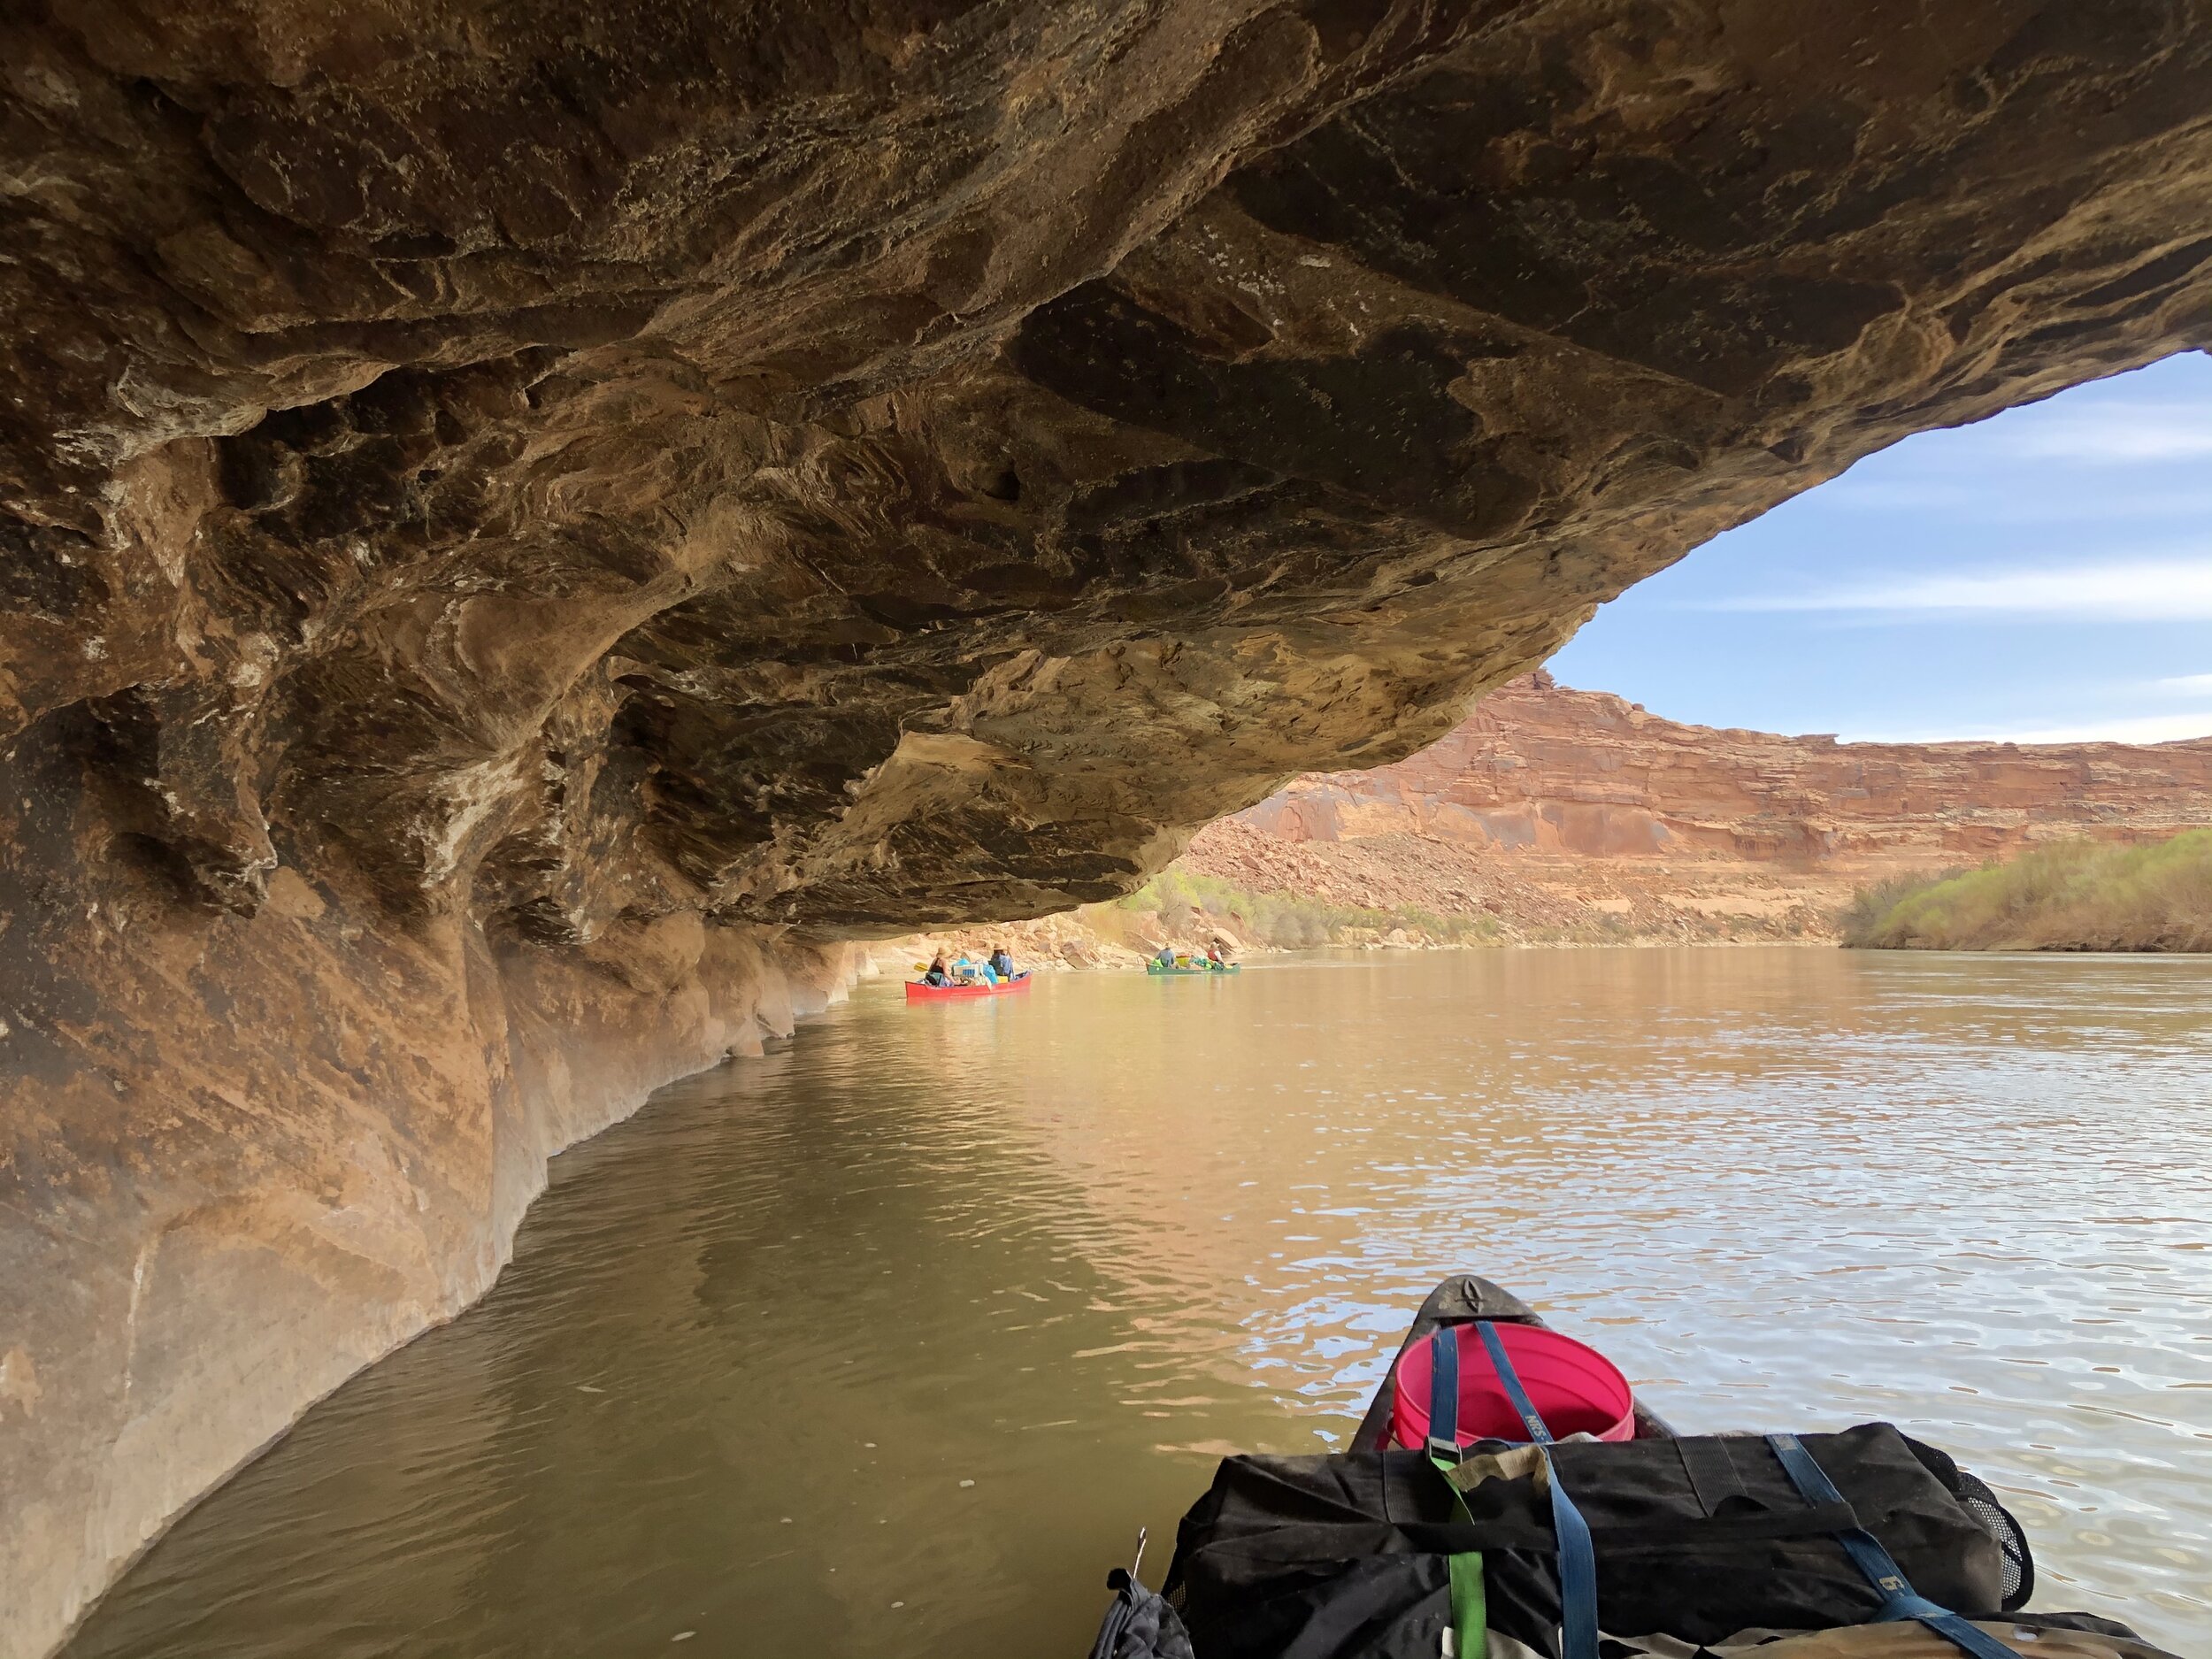 Floating down the Green River. Photo credit : Yaro Severn